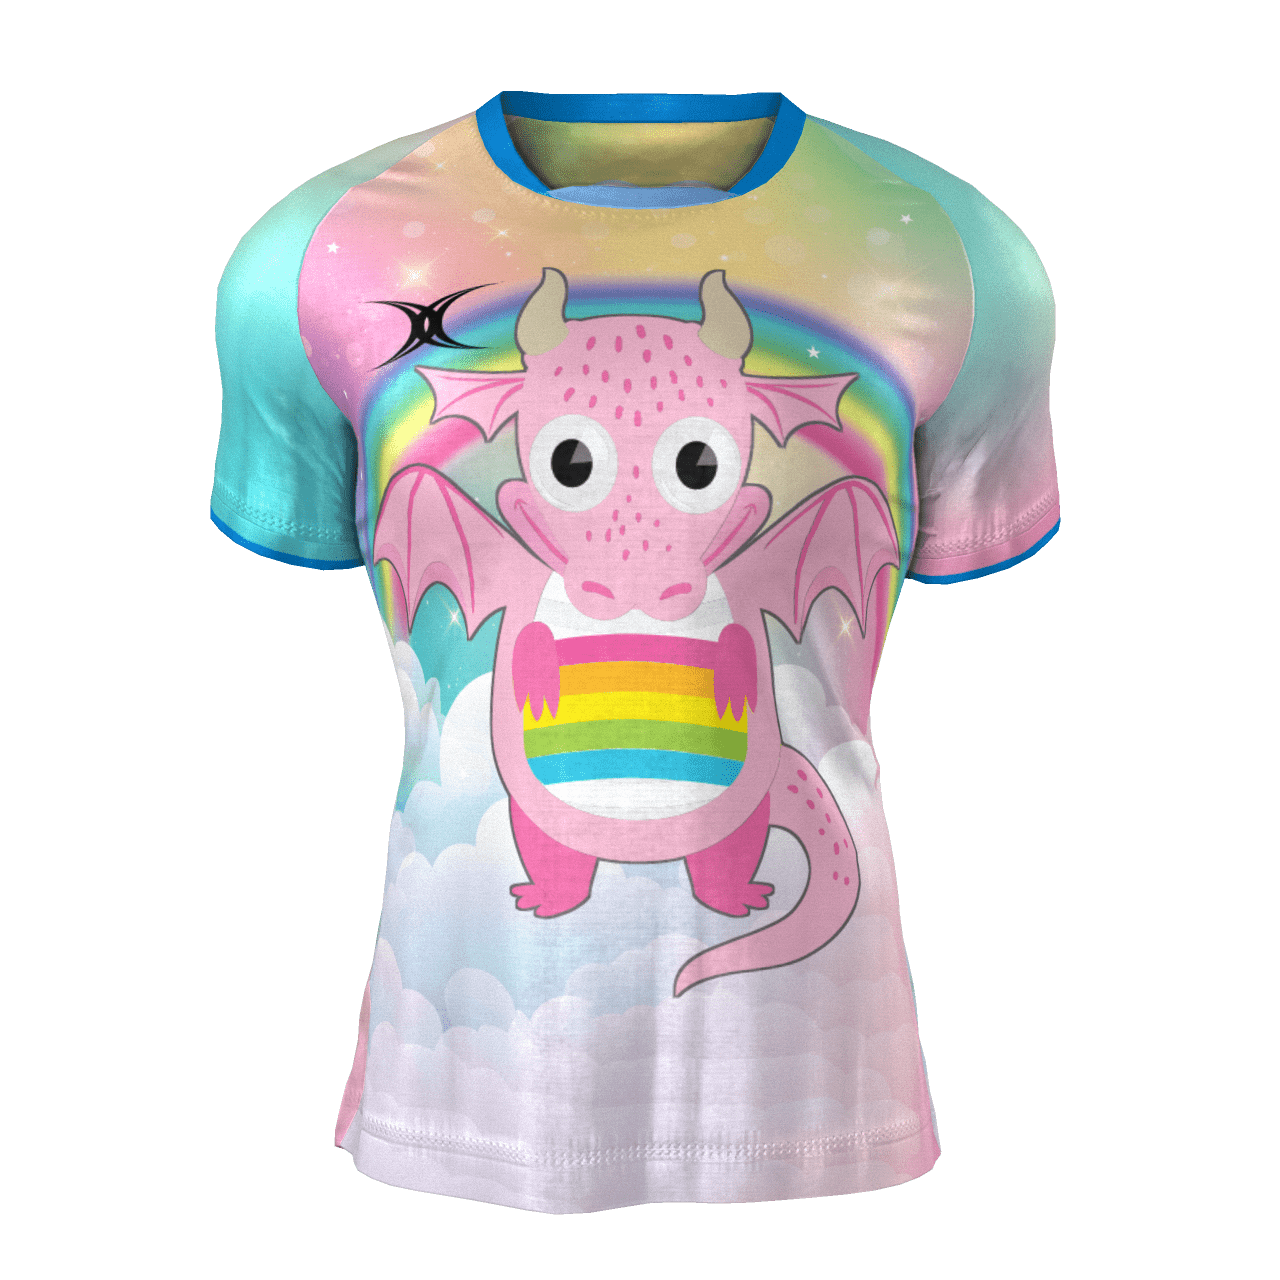 Baby Dragon's Cheer Dragon 7s Gilbert Jersey - World Rugby Shop